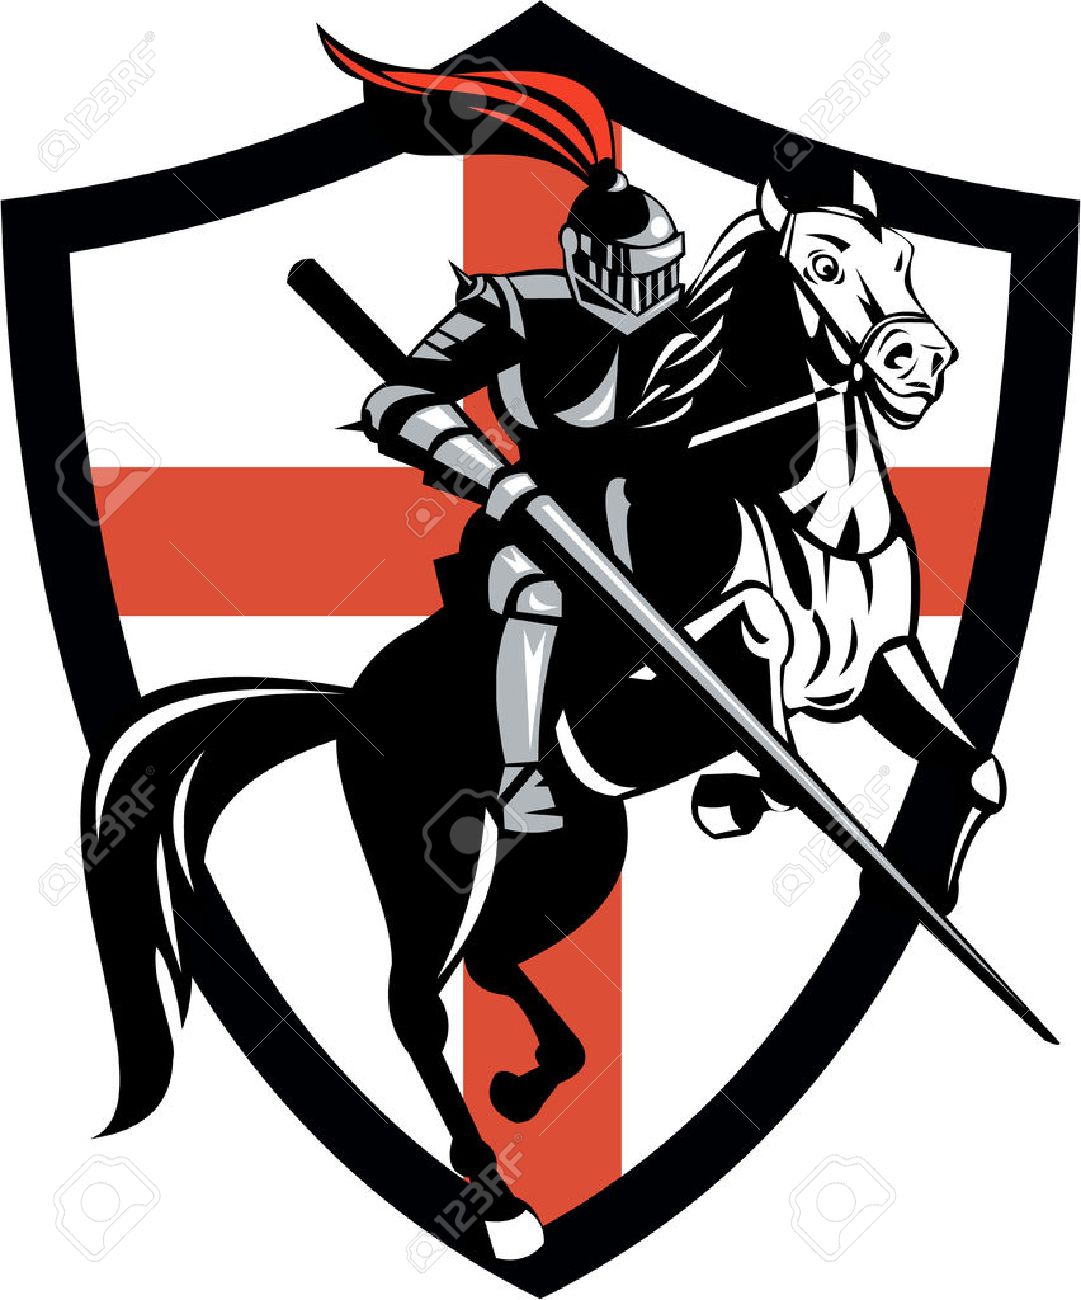 knight clipart medieval time